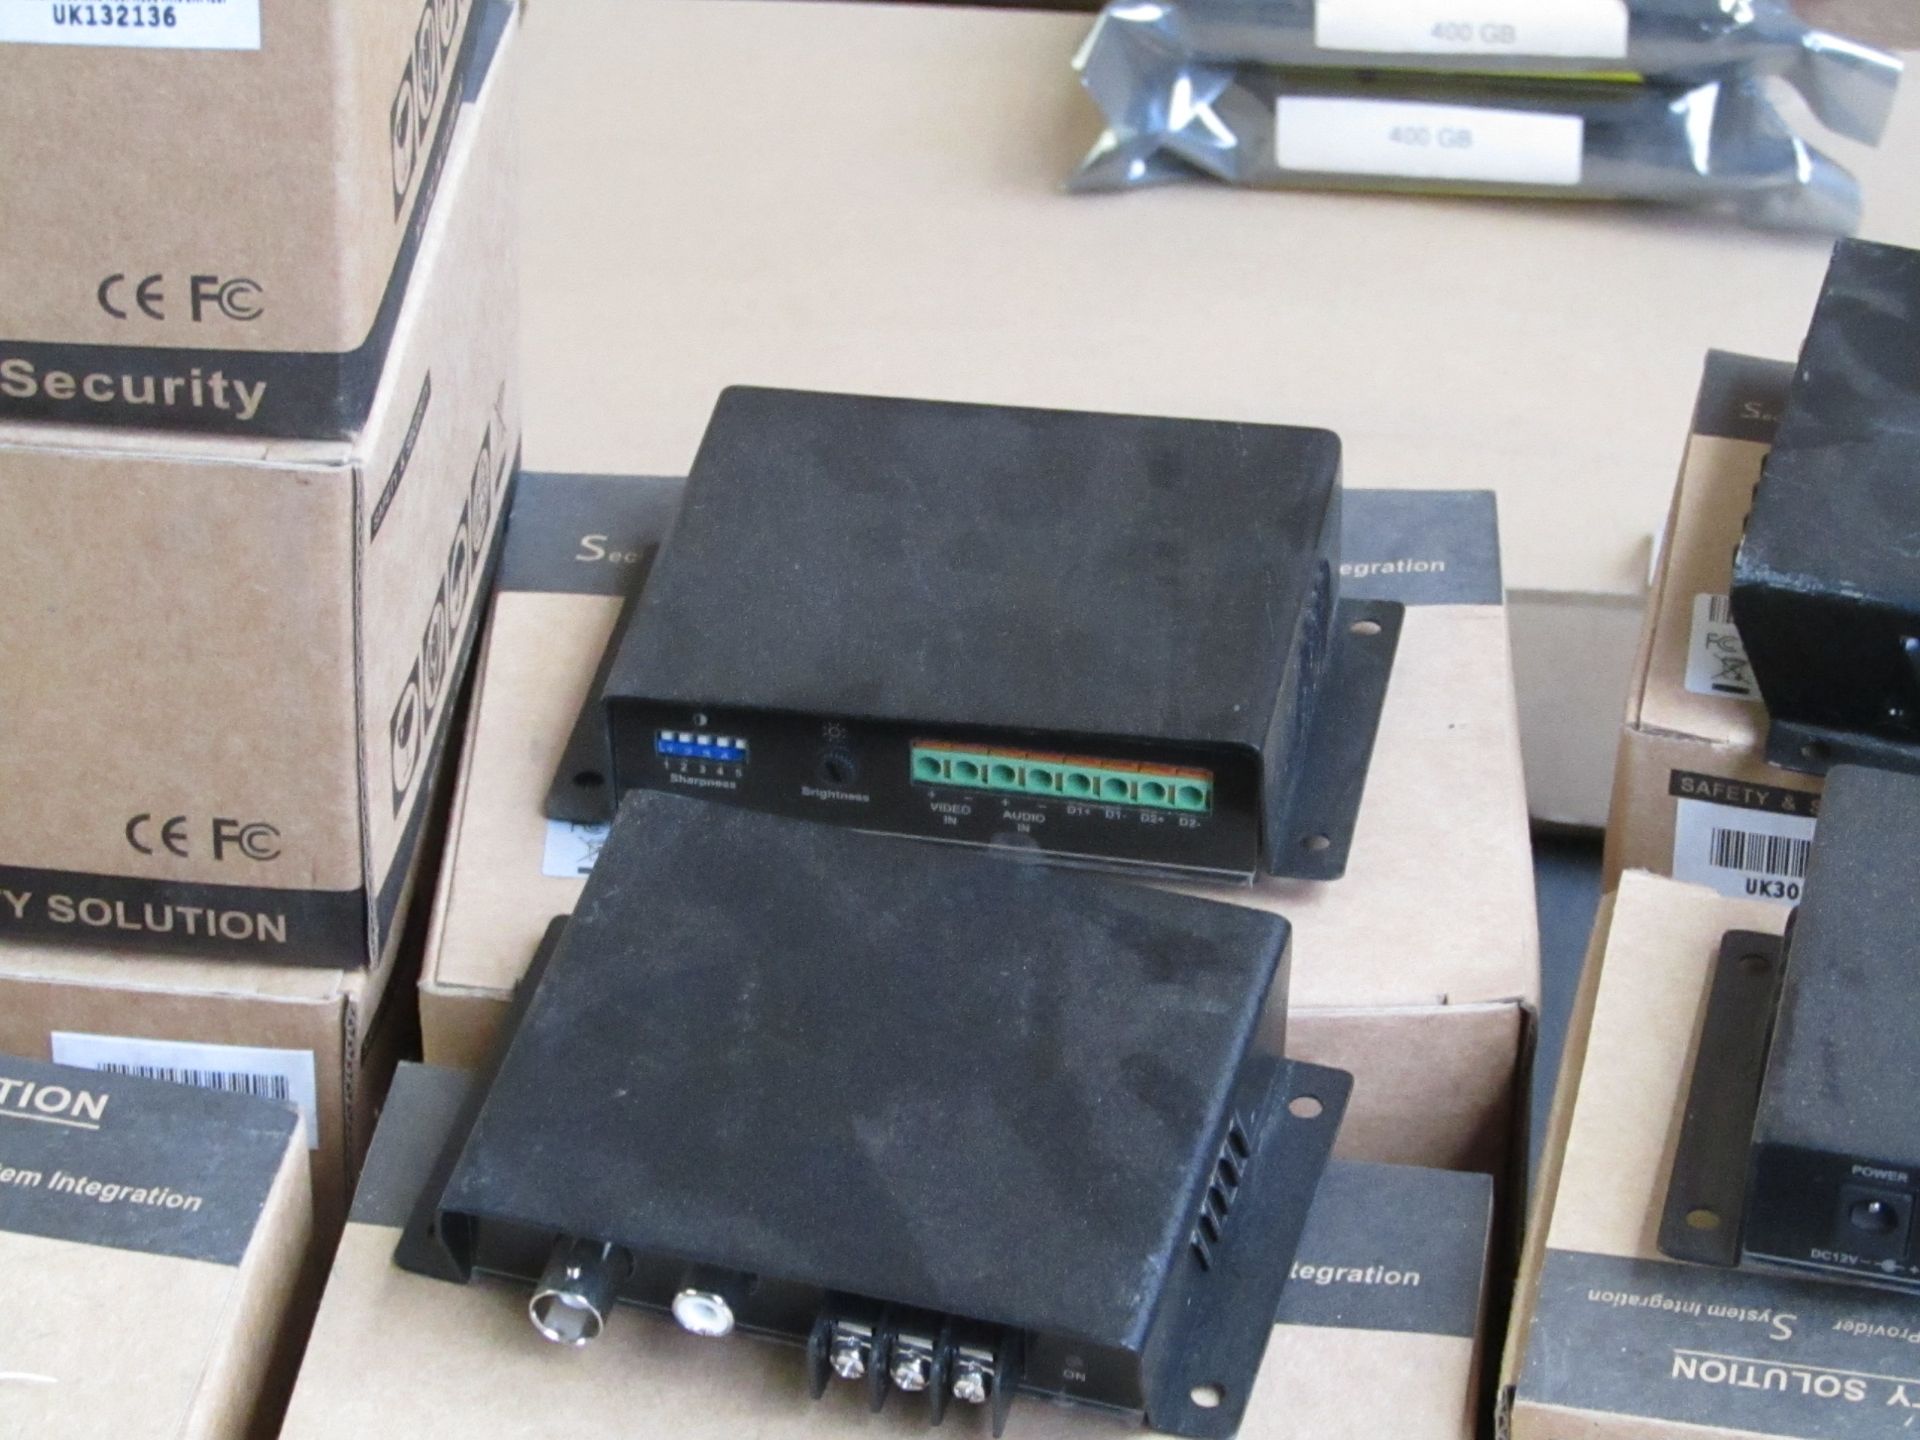 15-W102 2400m Twisted pair transmitter + receiver, tested working and boxed. Allows long range